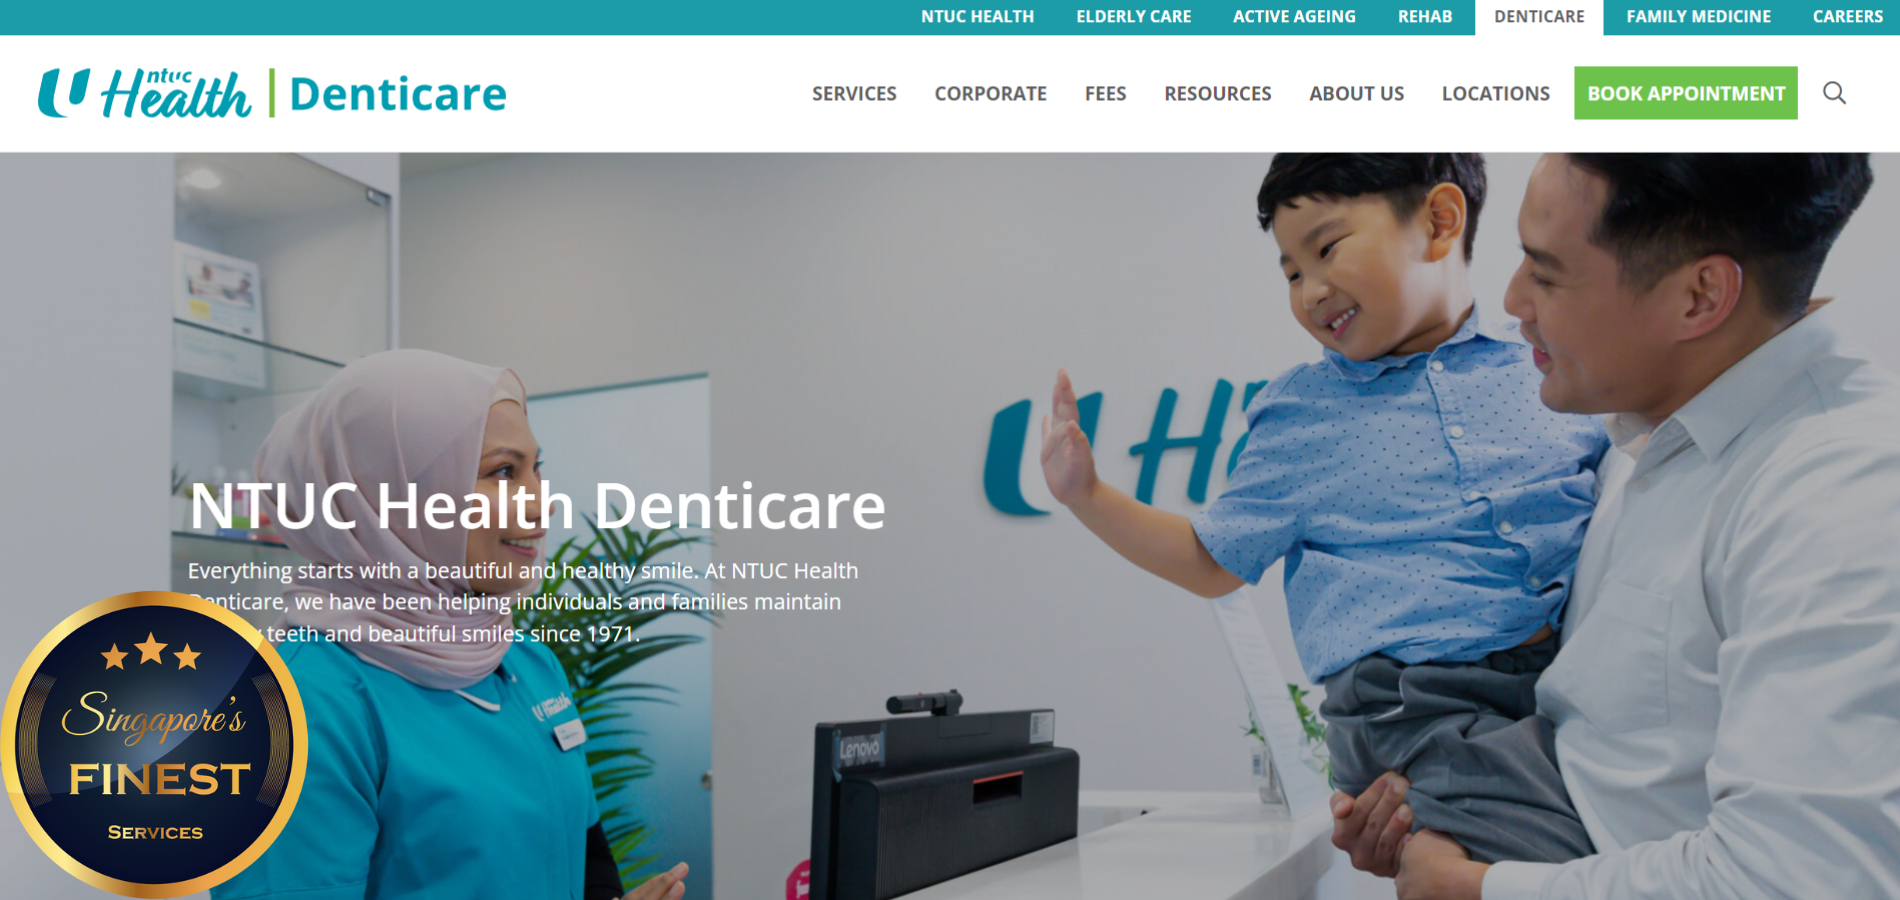 The Finest Clinics for Dental Crowns in Singapore